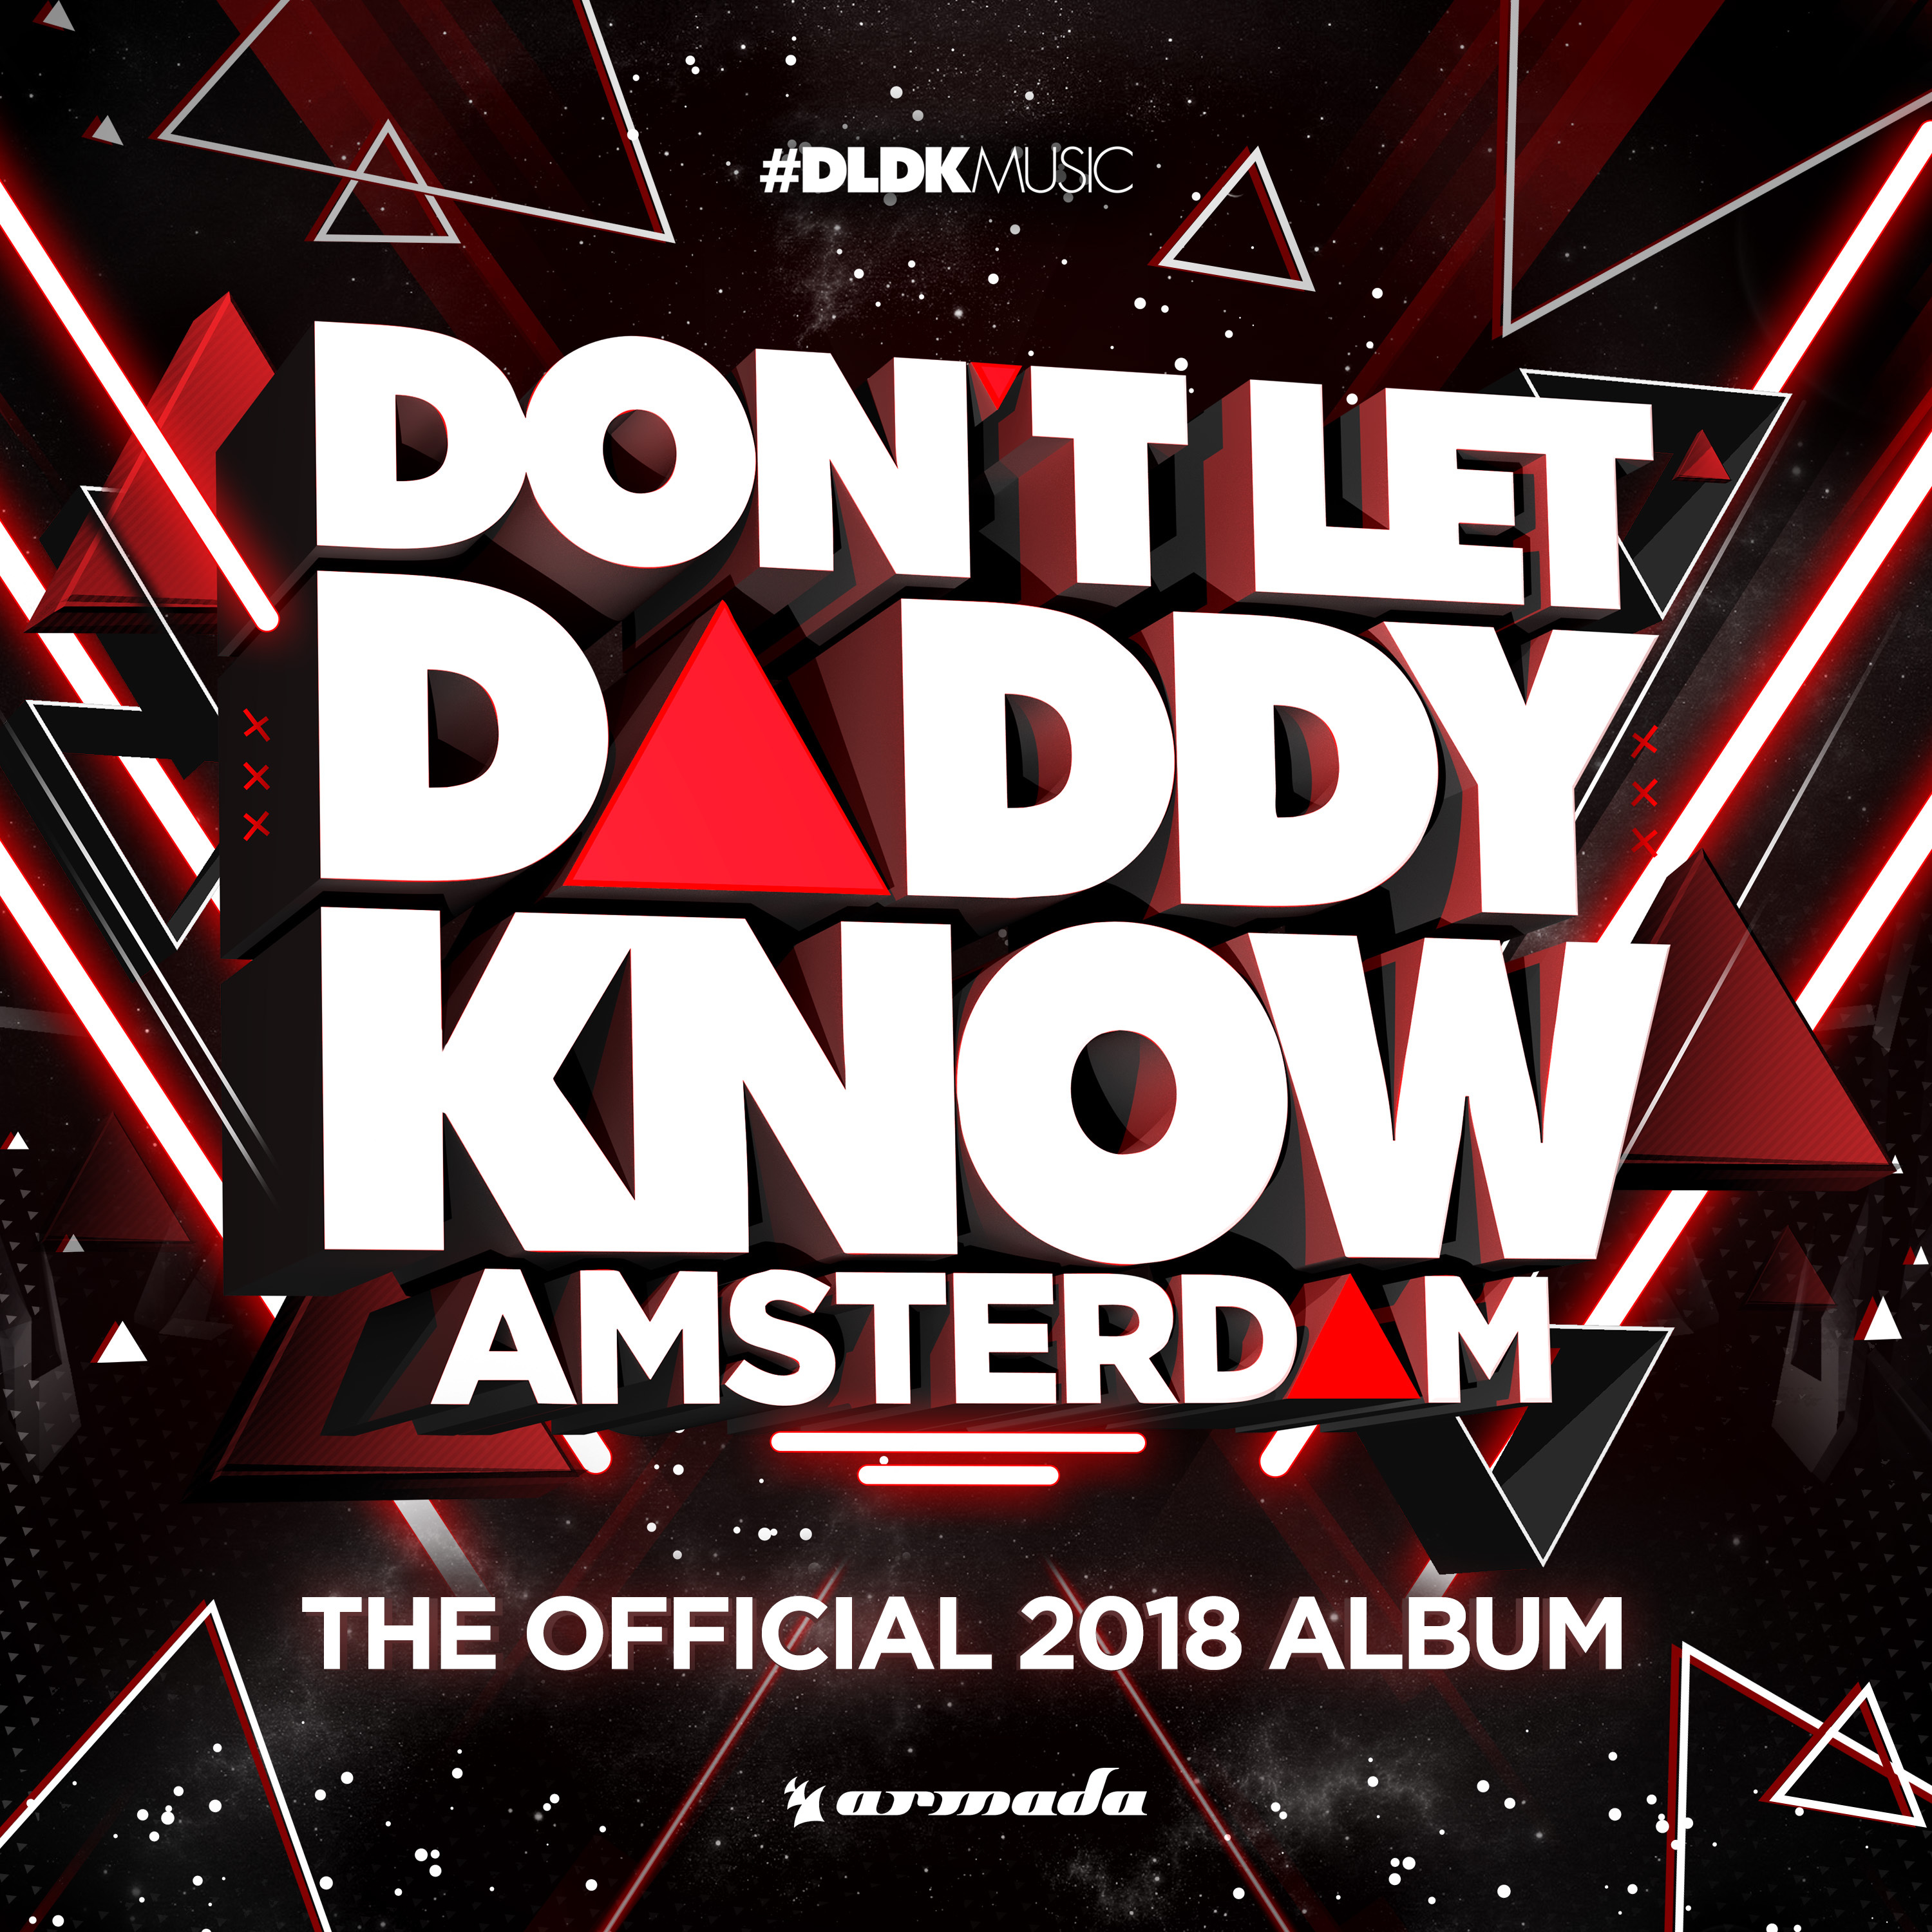 Don't Let Daddy Know - Amsterdam (The Official 2018 Album)